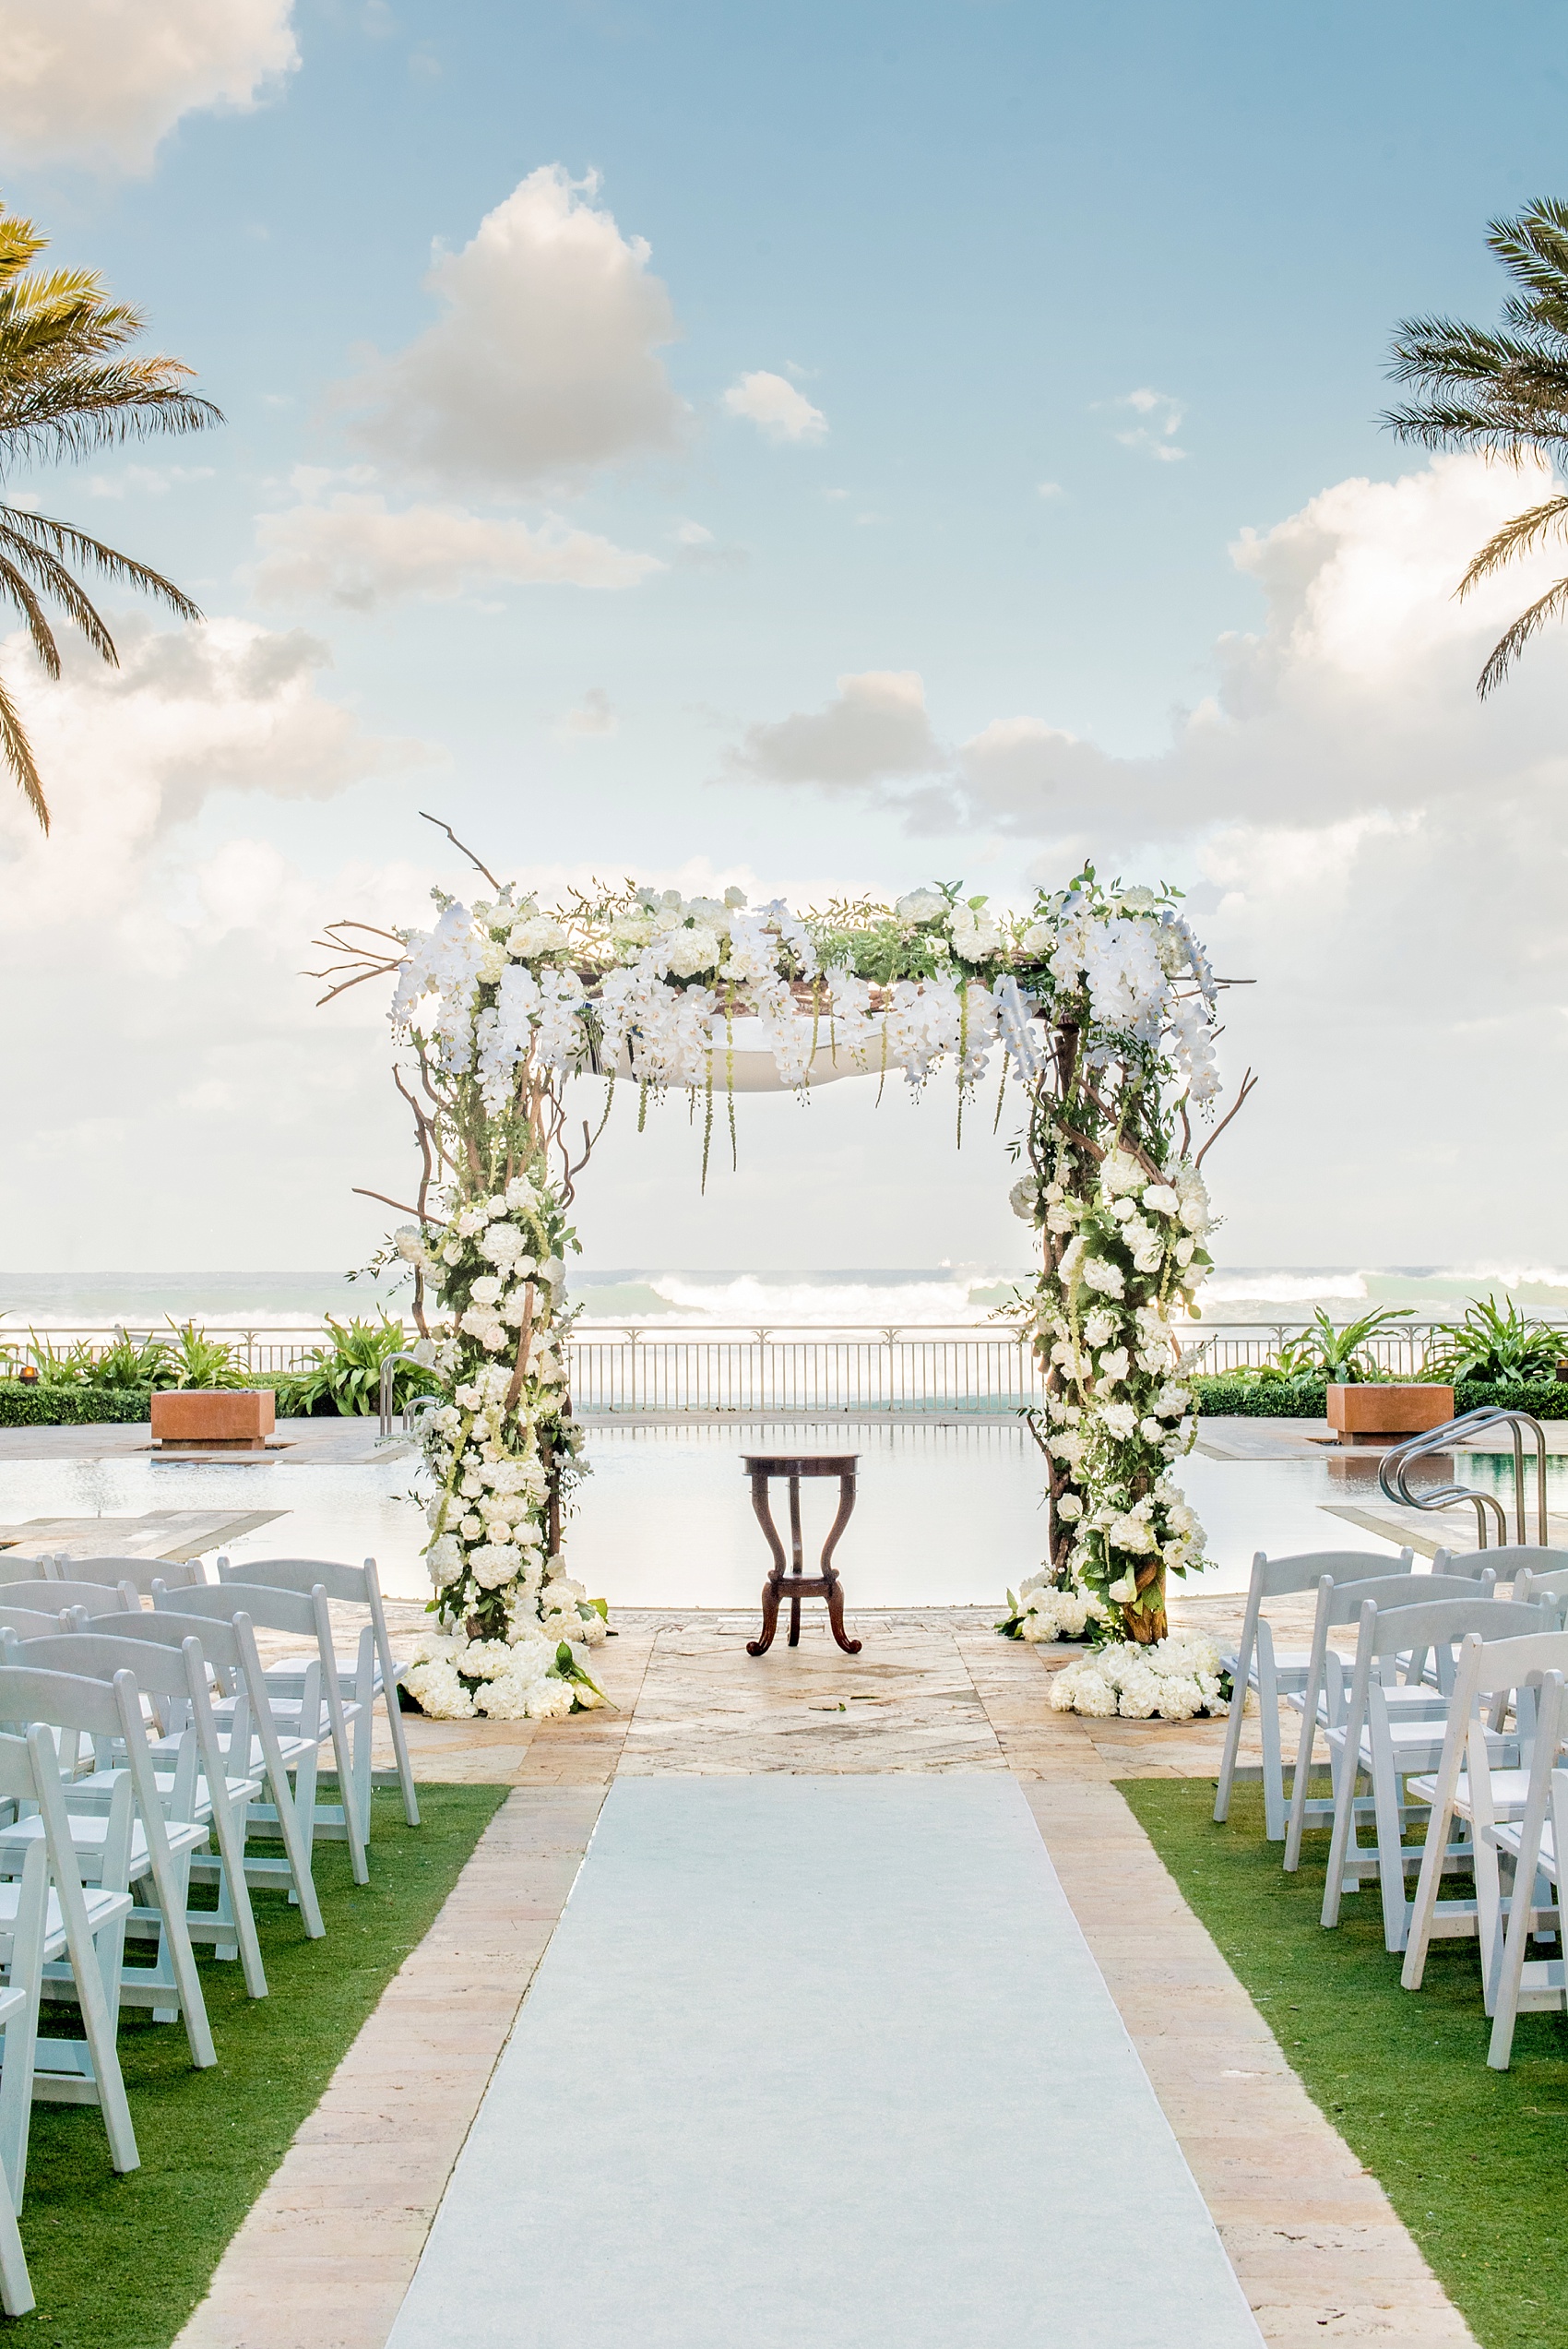 Eau Palm Beach wedding photos by destination photographer, Mikkel Paige. This luxury West Palm Beach, Florida hotel is a beautiful location for a destination wedding. The traditional Jewish ceremony had a bedekan and tish, followed by an outdoor ocean front ceremony under a gorgeous chuppah. Click through to see more! #WestPalmBeach #EauPalmBeach #BeachWedding #FloridaWeddings #BeachBride #Jewishwedding #chuppah